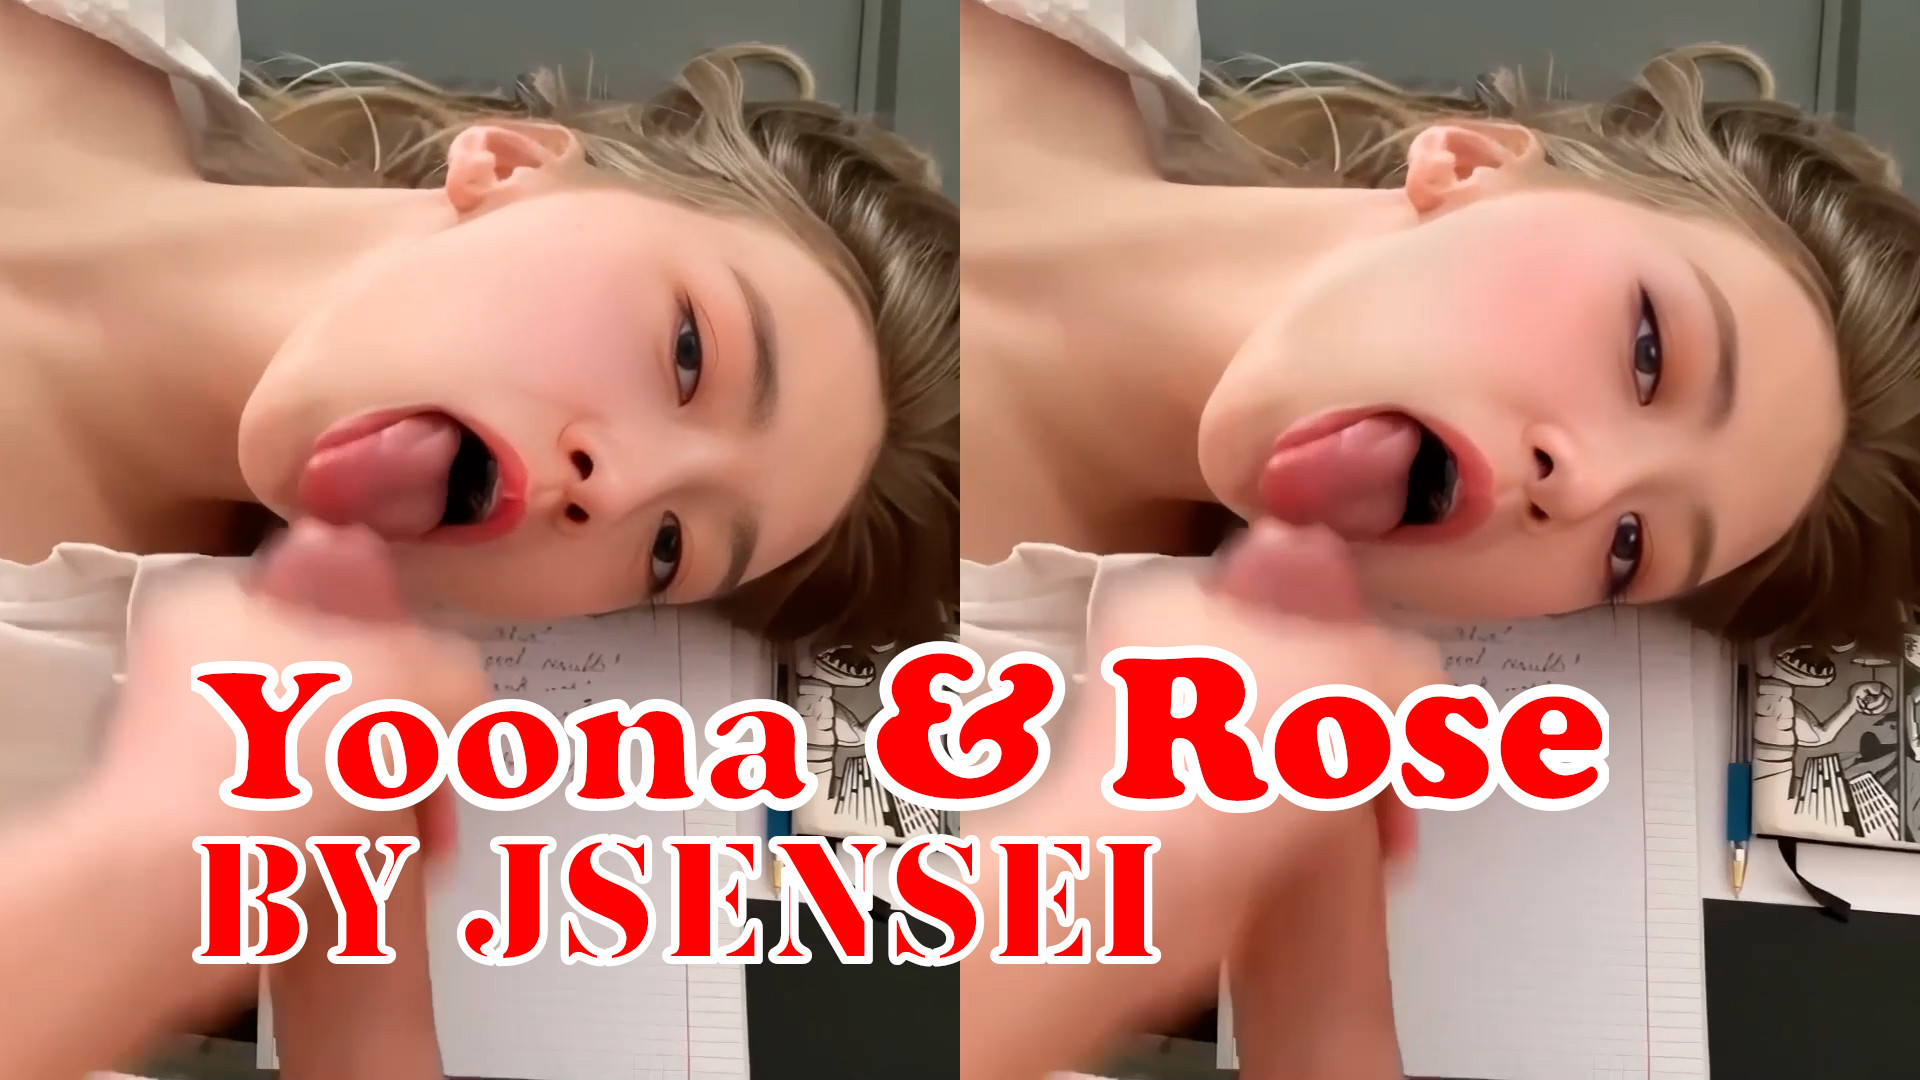 Yoona & Rose - POV Blowjob in various locations (CZK-001)